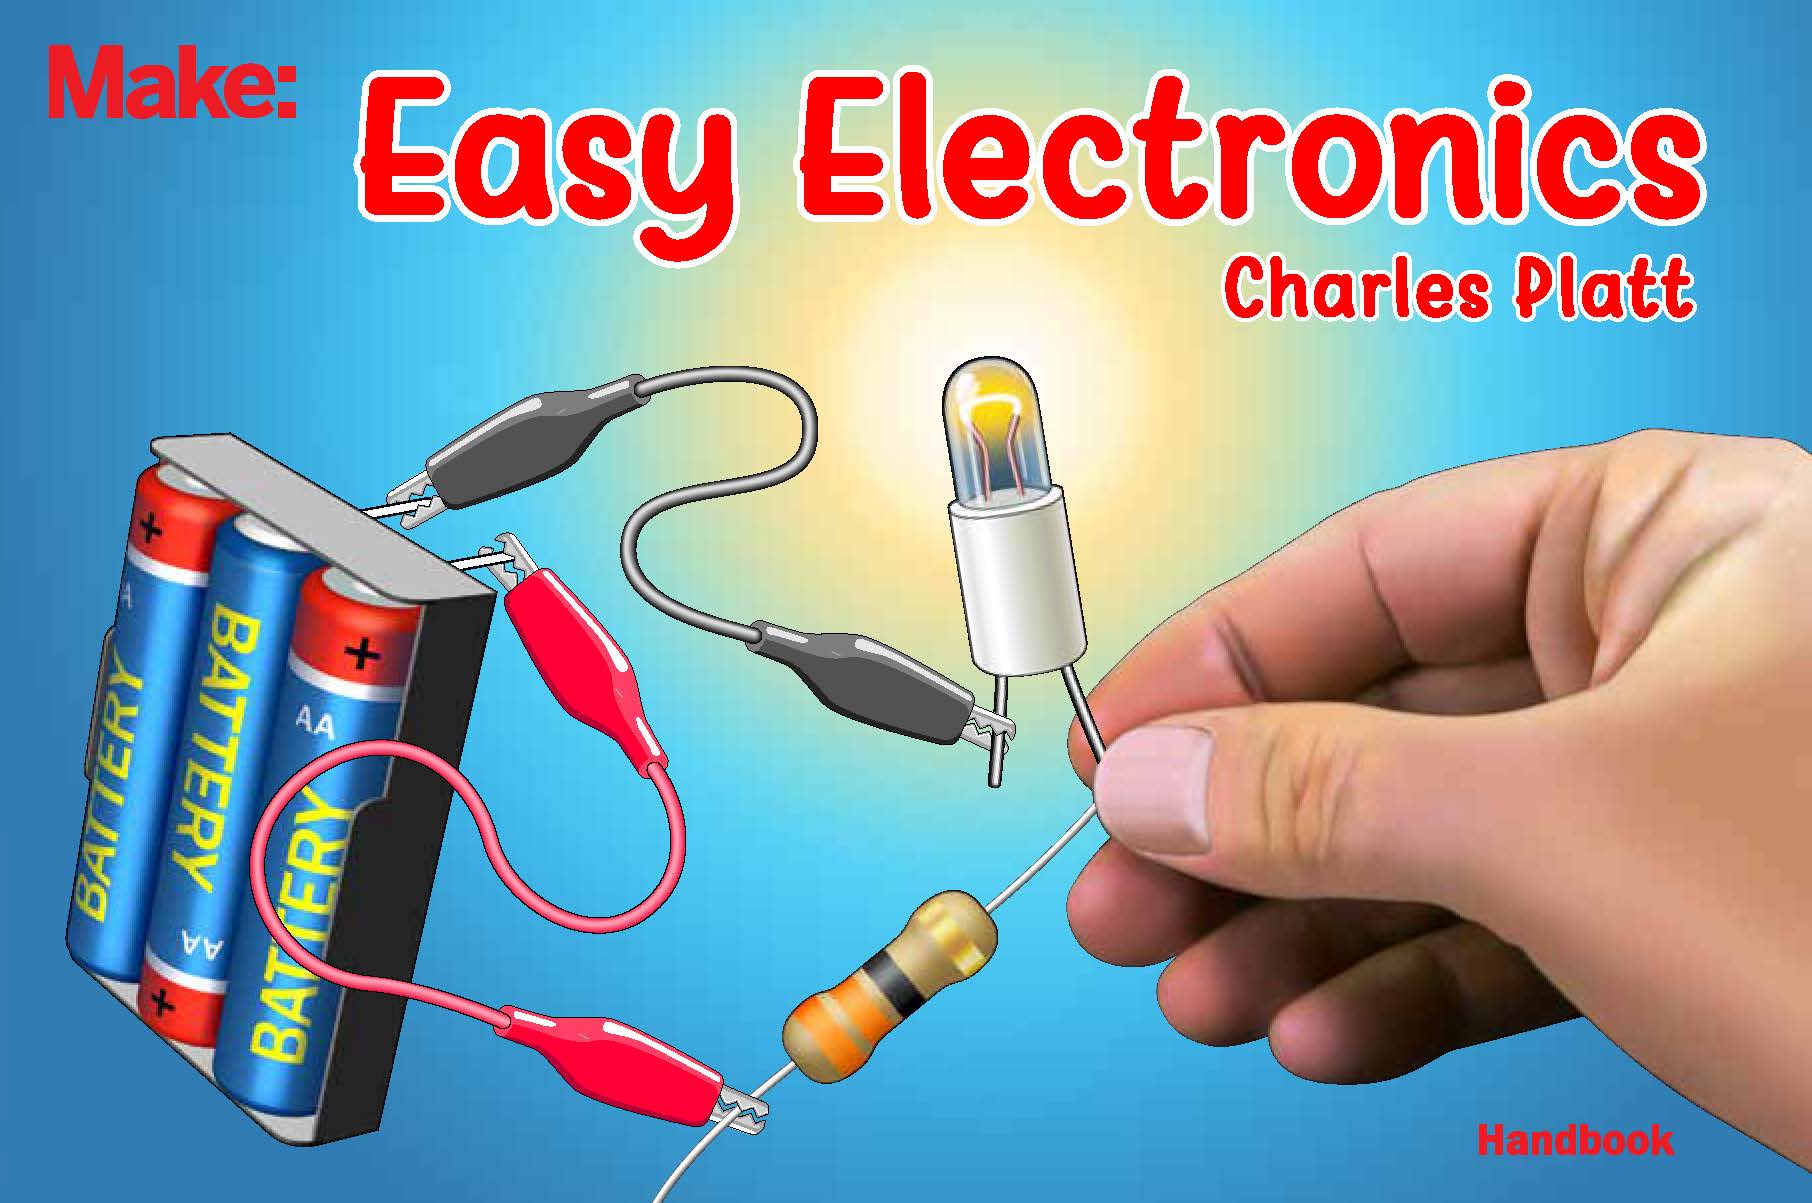 Easy Electronics Component Pack ProTechTrader Make Book Sold Separately Lean Basic Electronics with no Tools for Easy Electronics by Charles Platt 